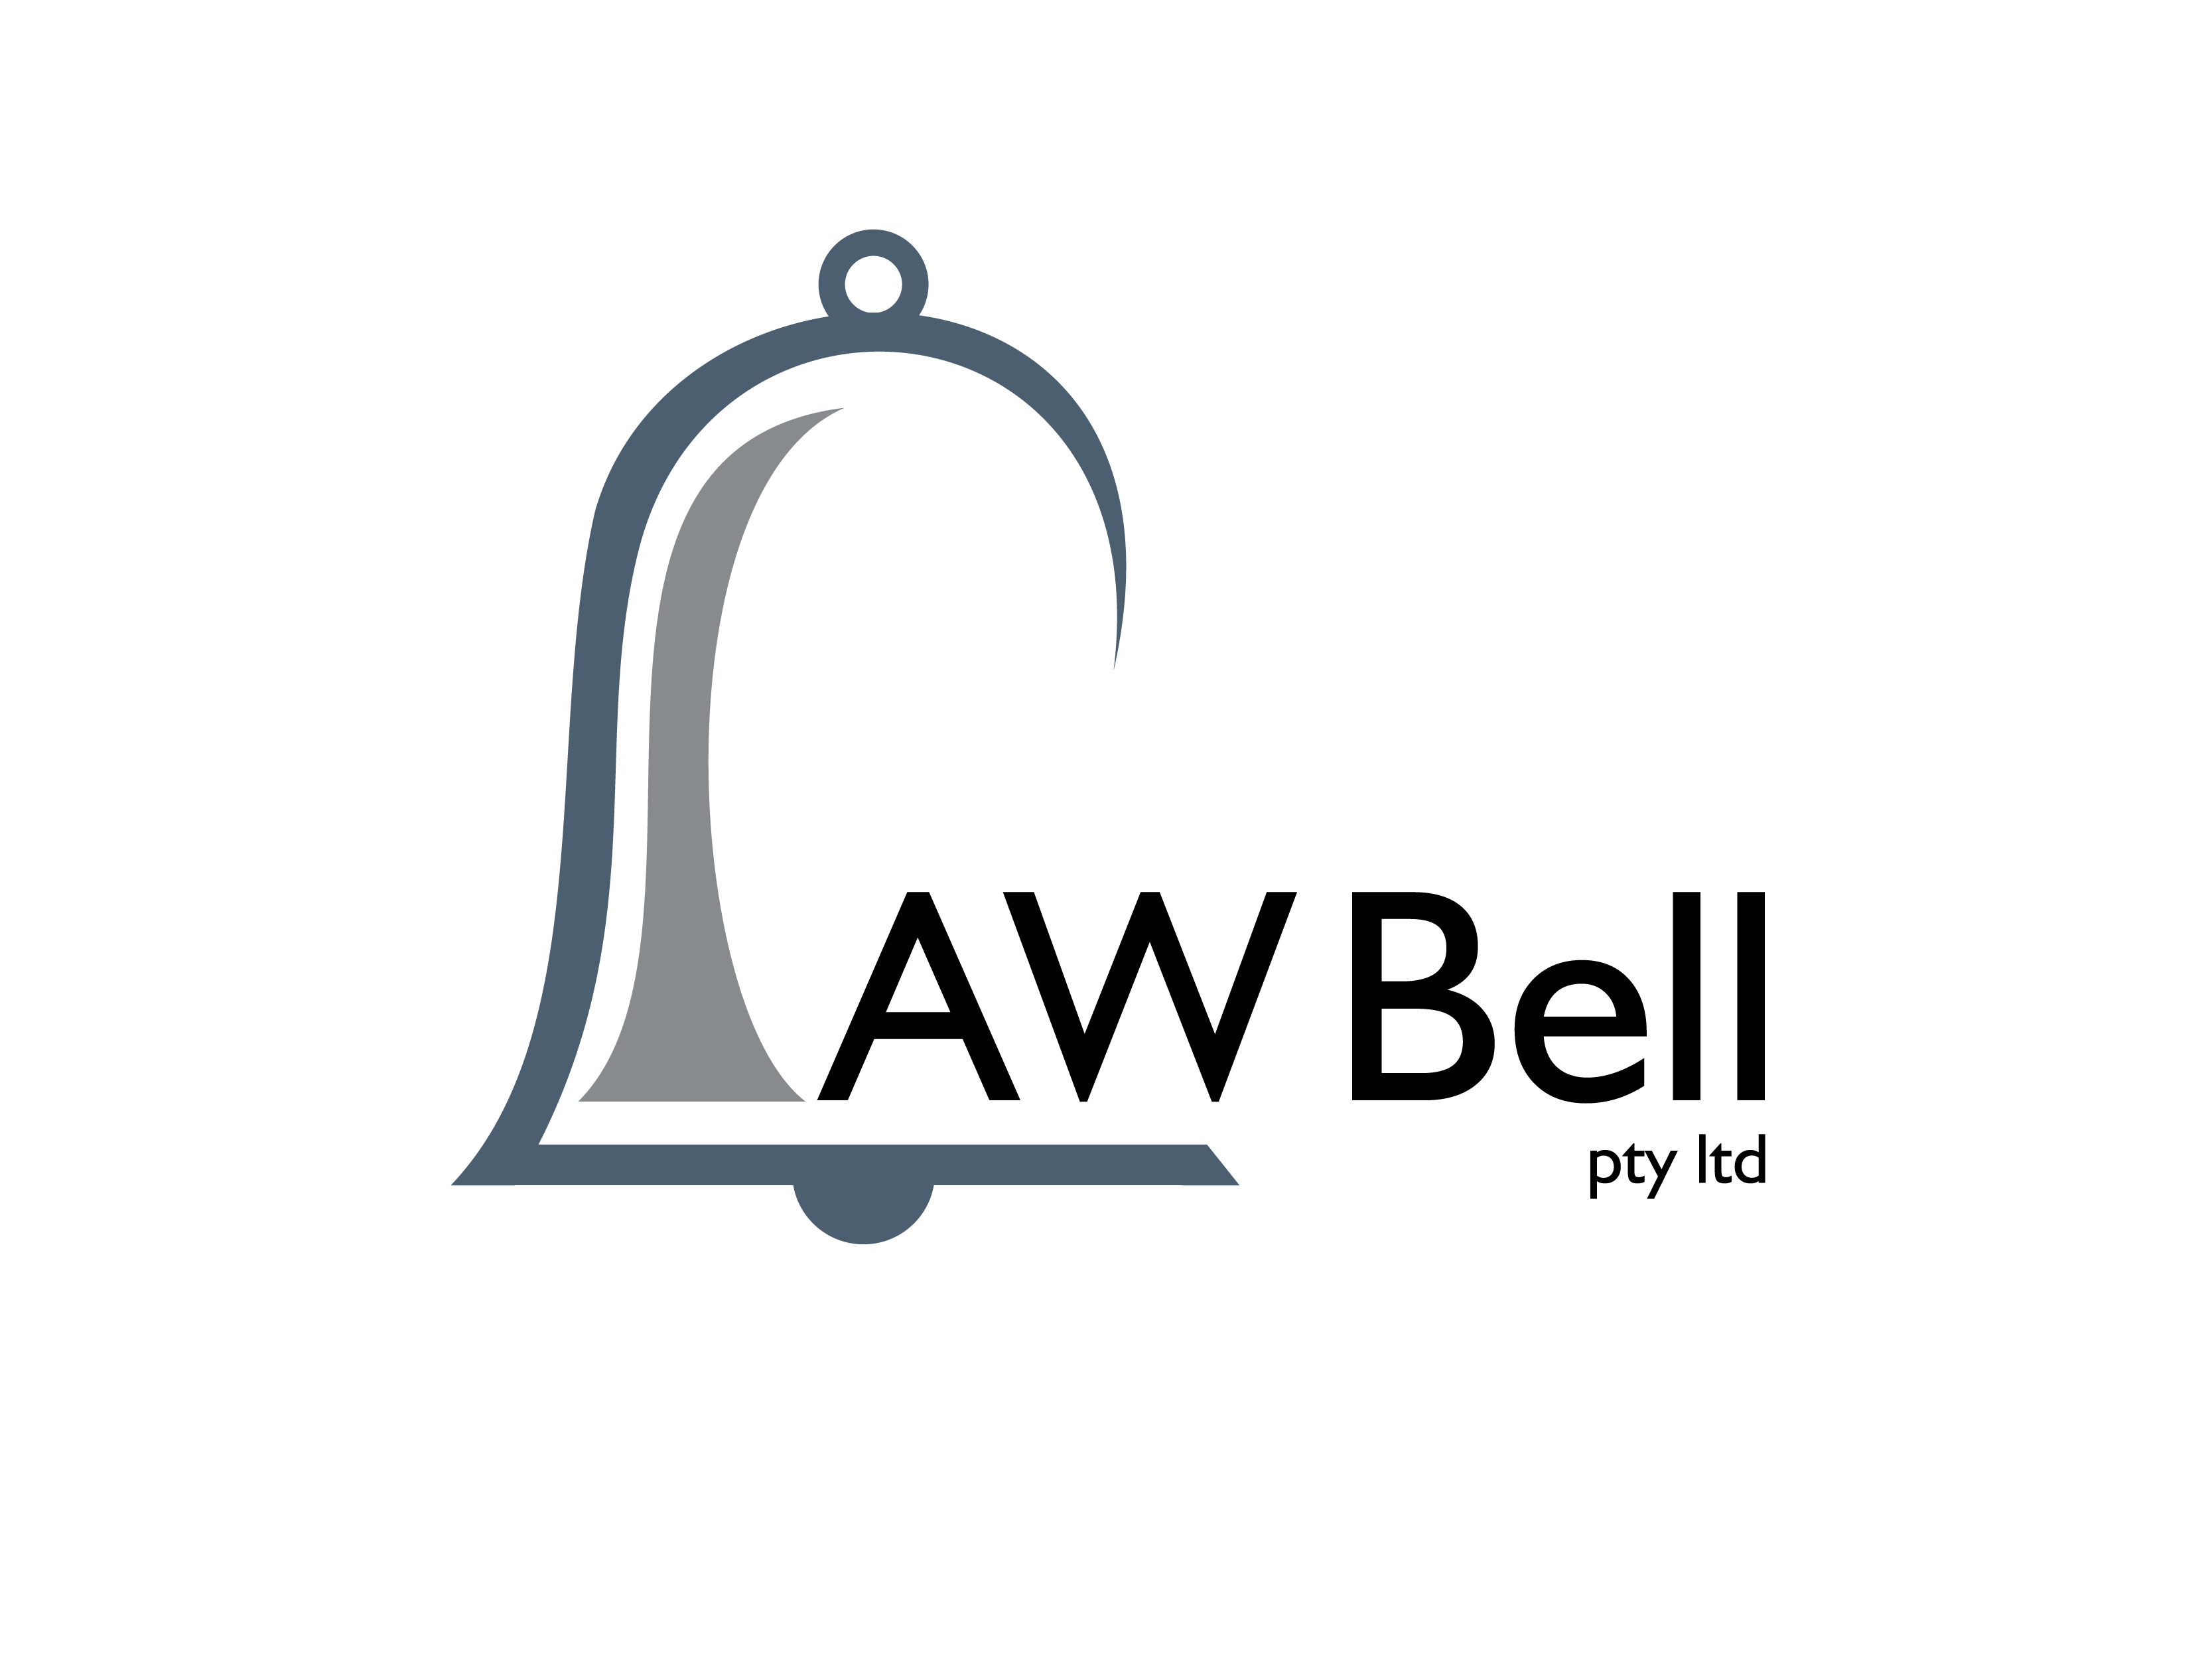 AW Bell company logo text: bell with black text